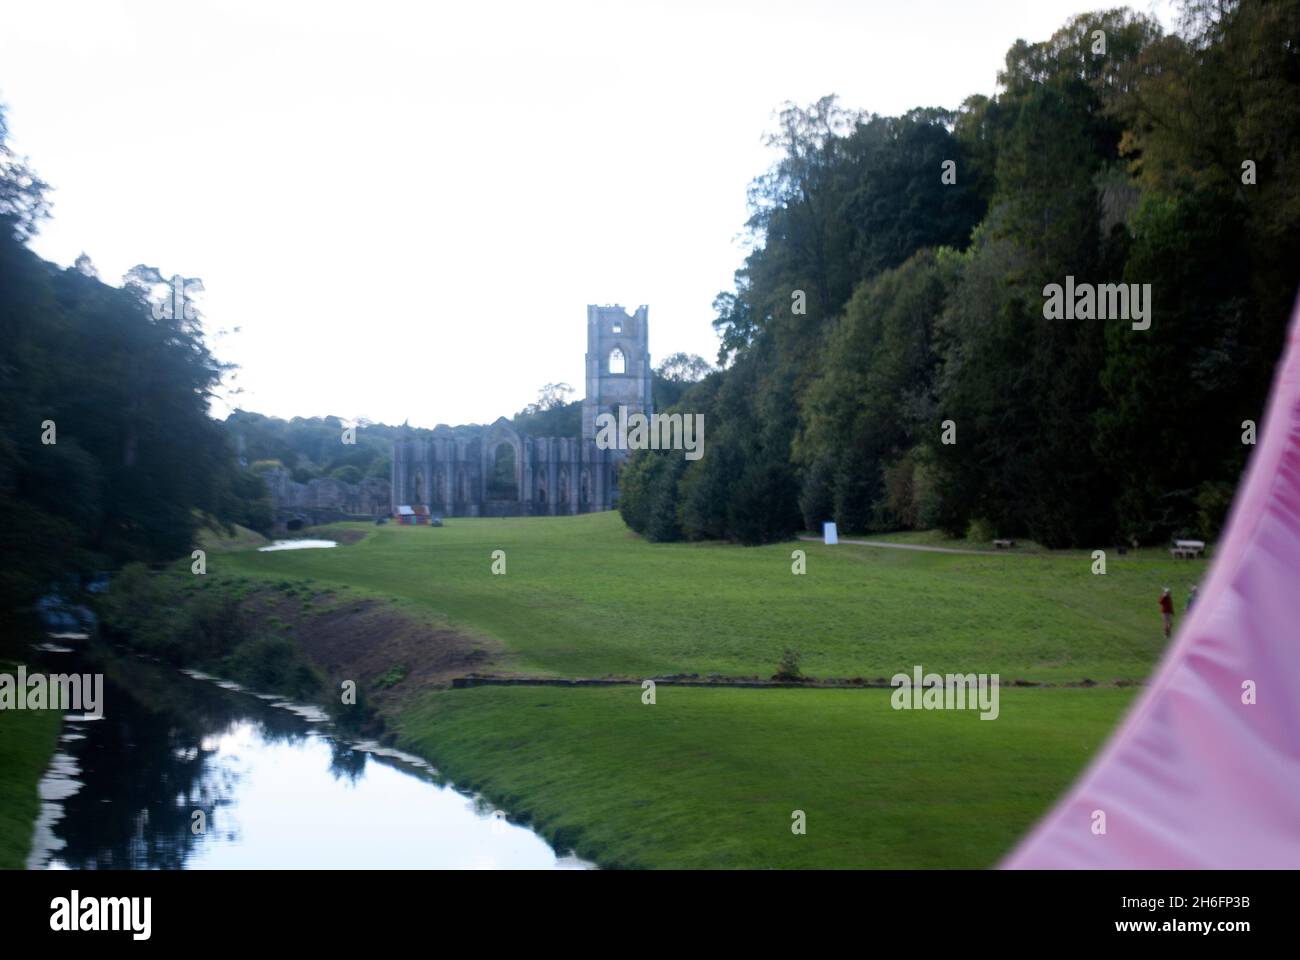 Edge of 'Bridged' Art Installation Tower of Fountains Abbey and River Skell, Studley Royal Park, Aldfield, North Yorkshire, England Stockfoto